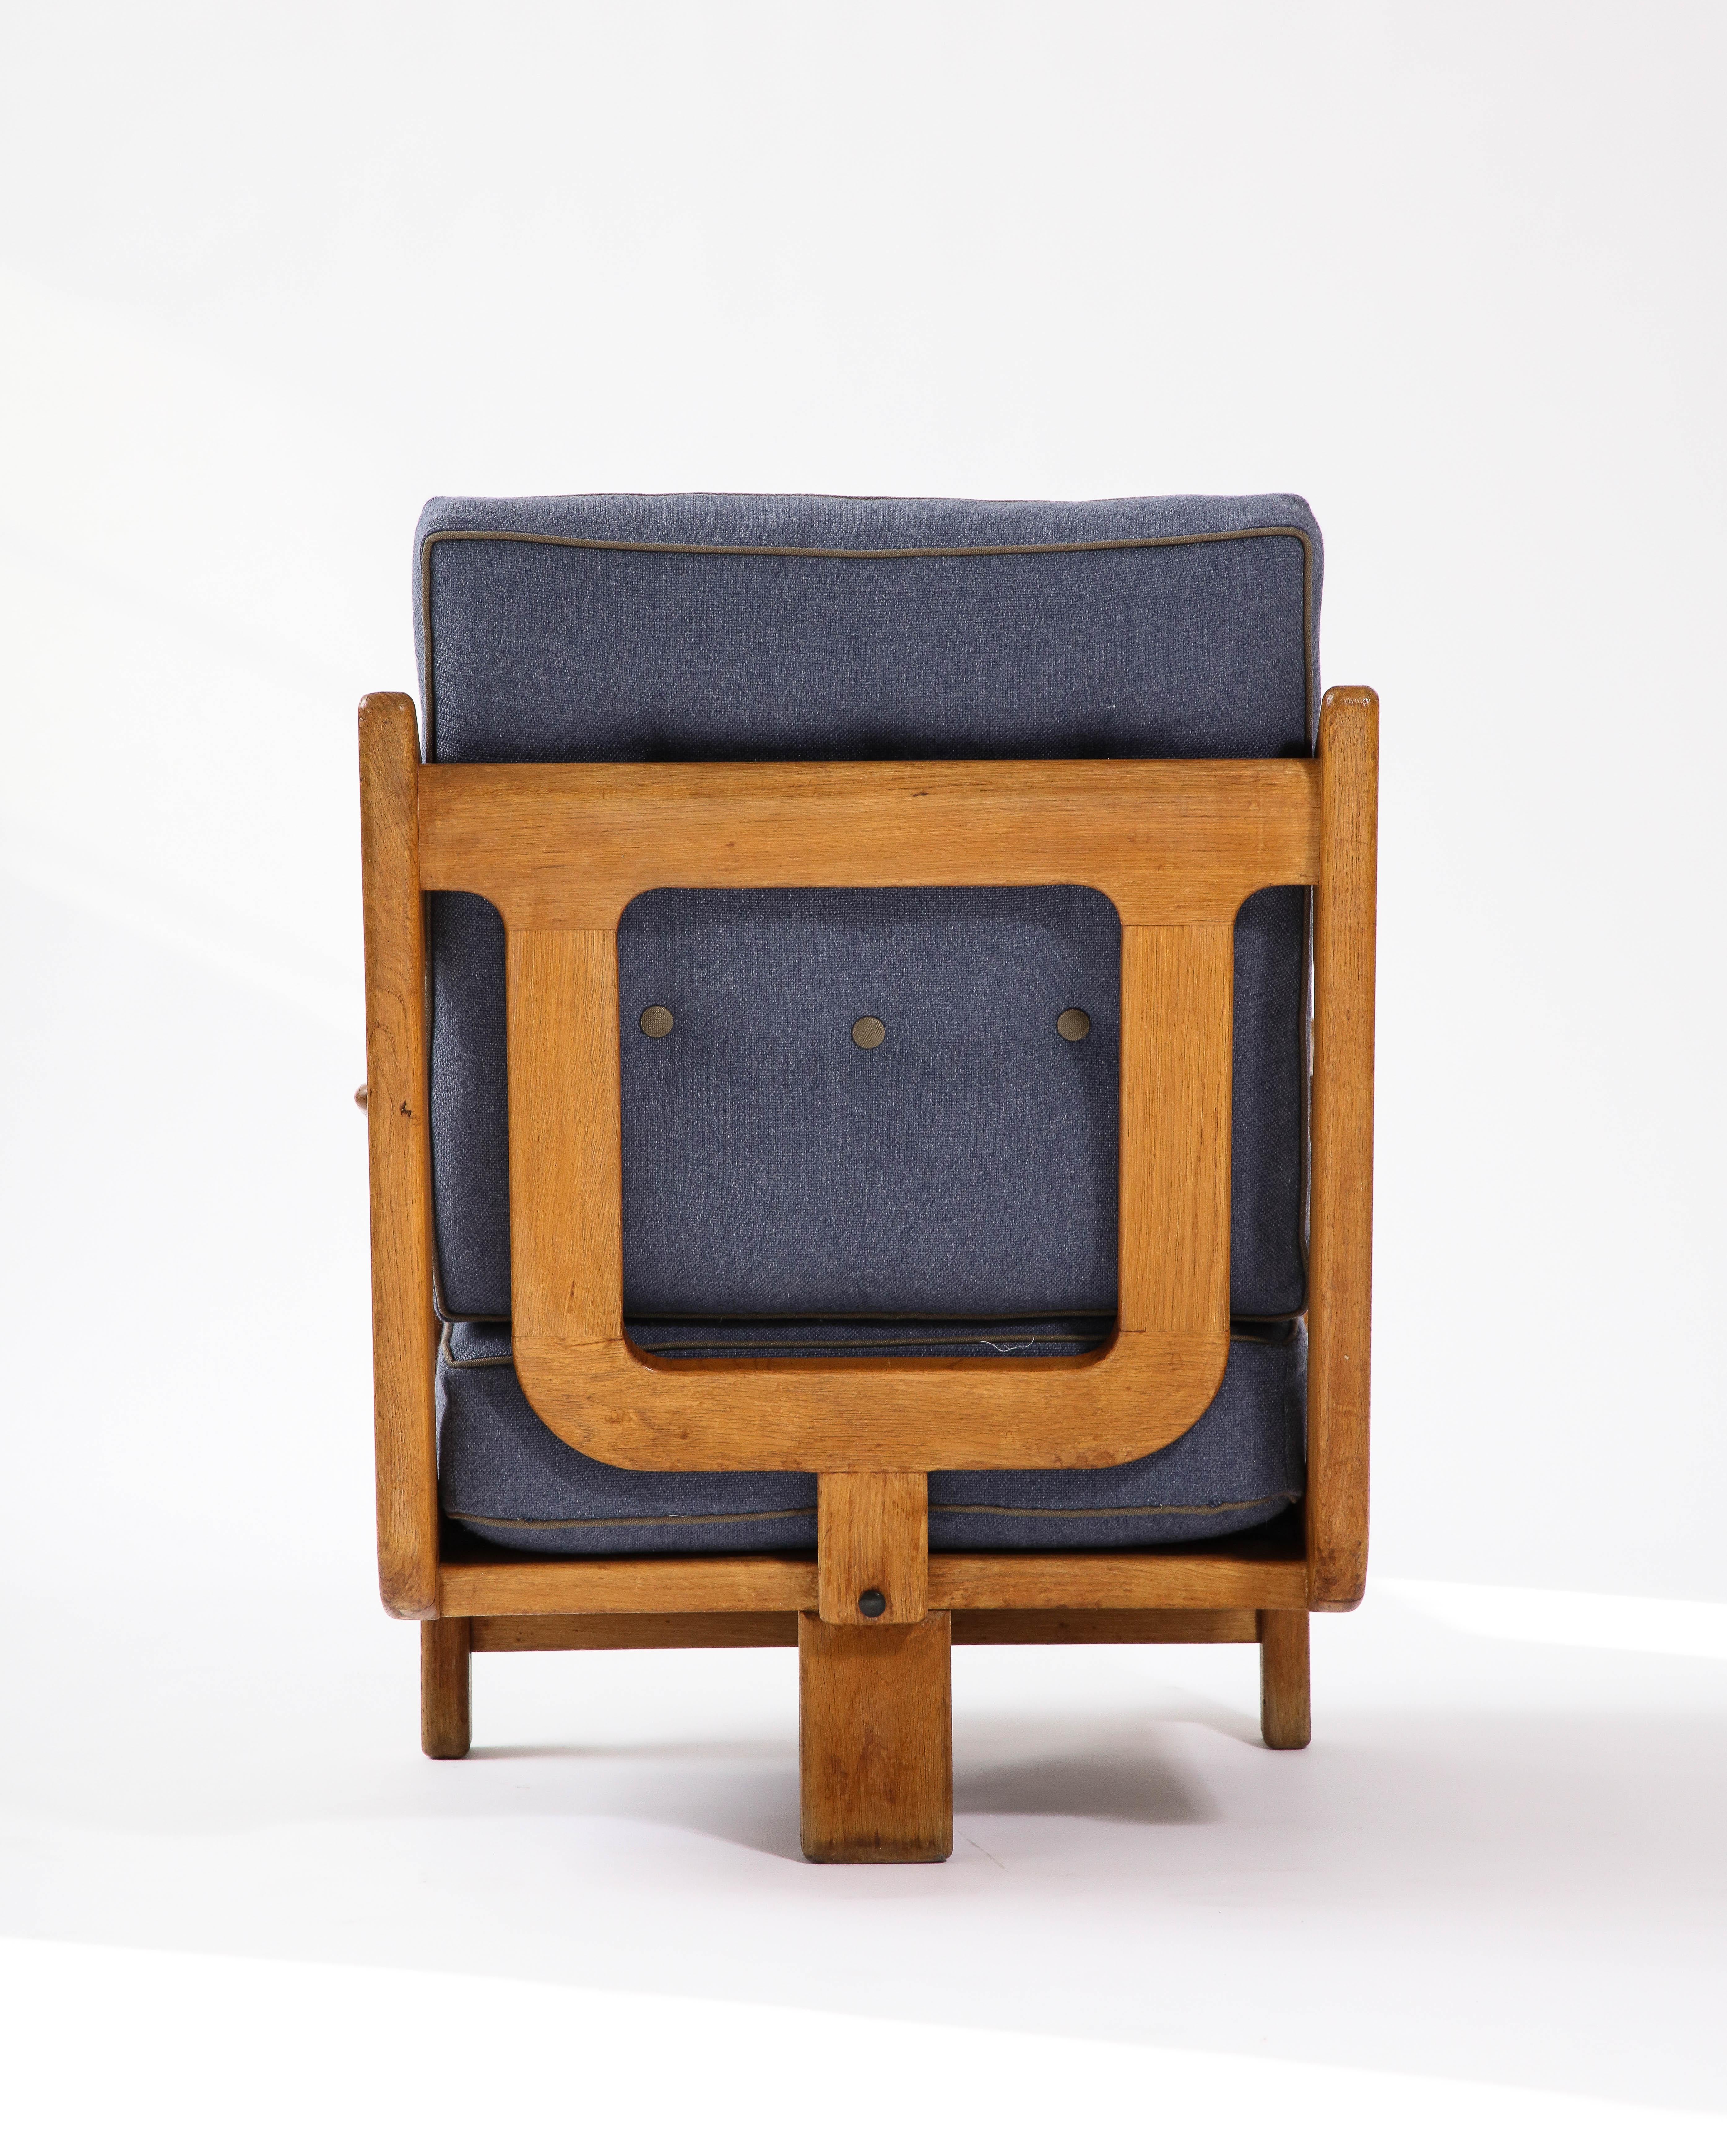 20th Century Rare Tripod Armchair by Guillerme et Chambron, France, c. 1960 For Sale